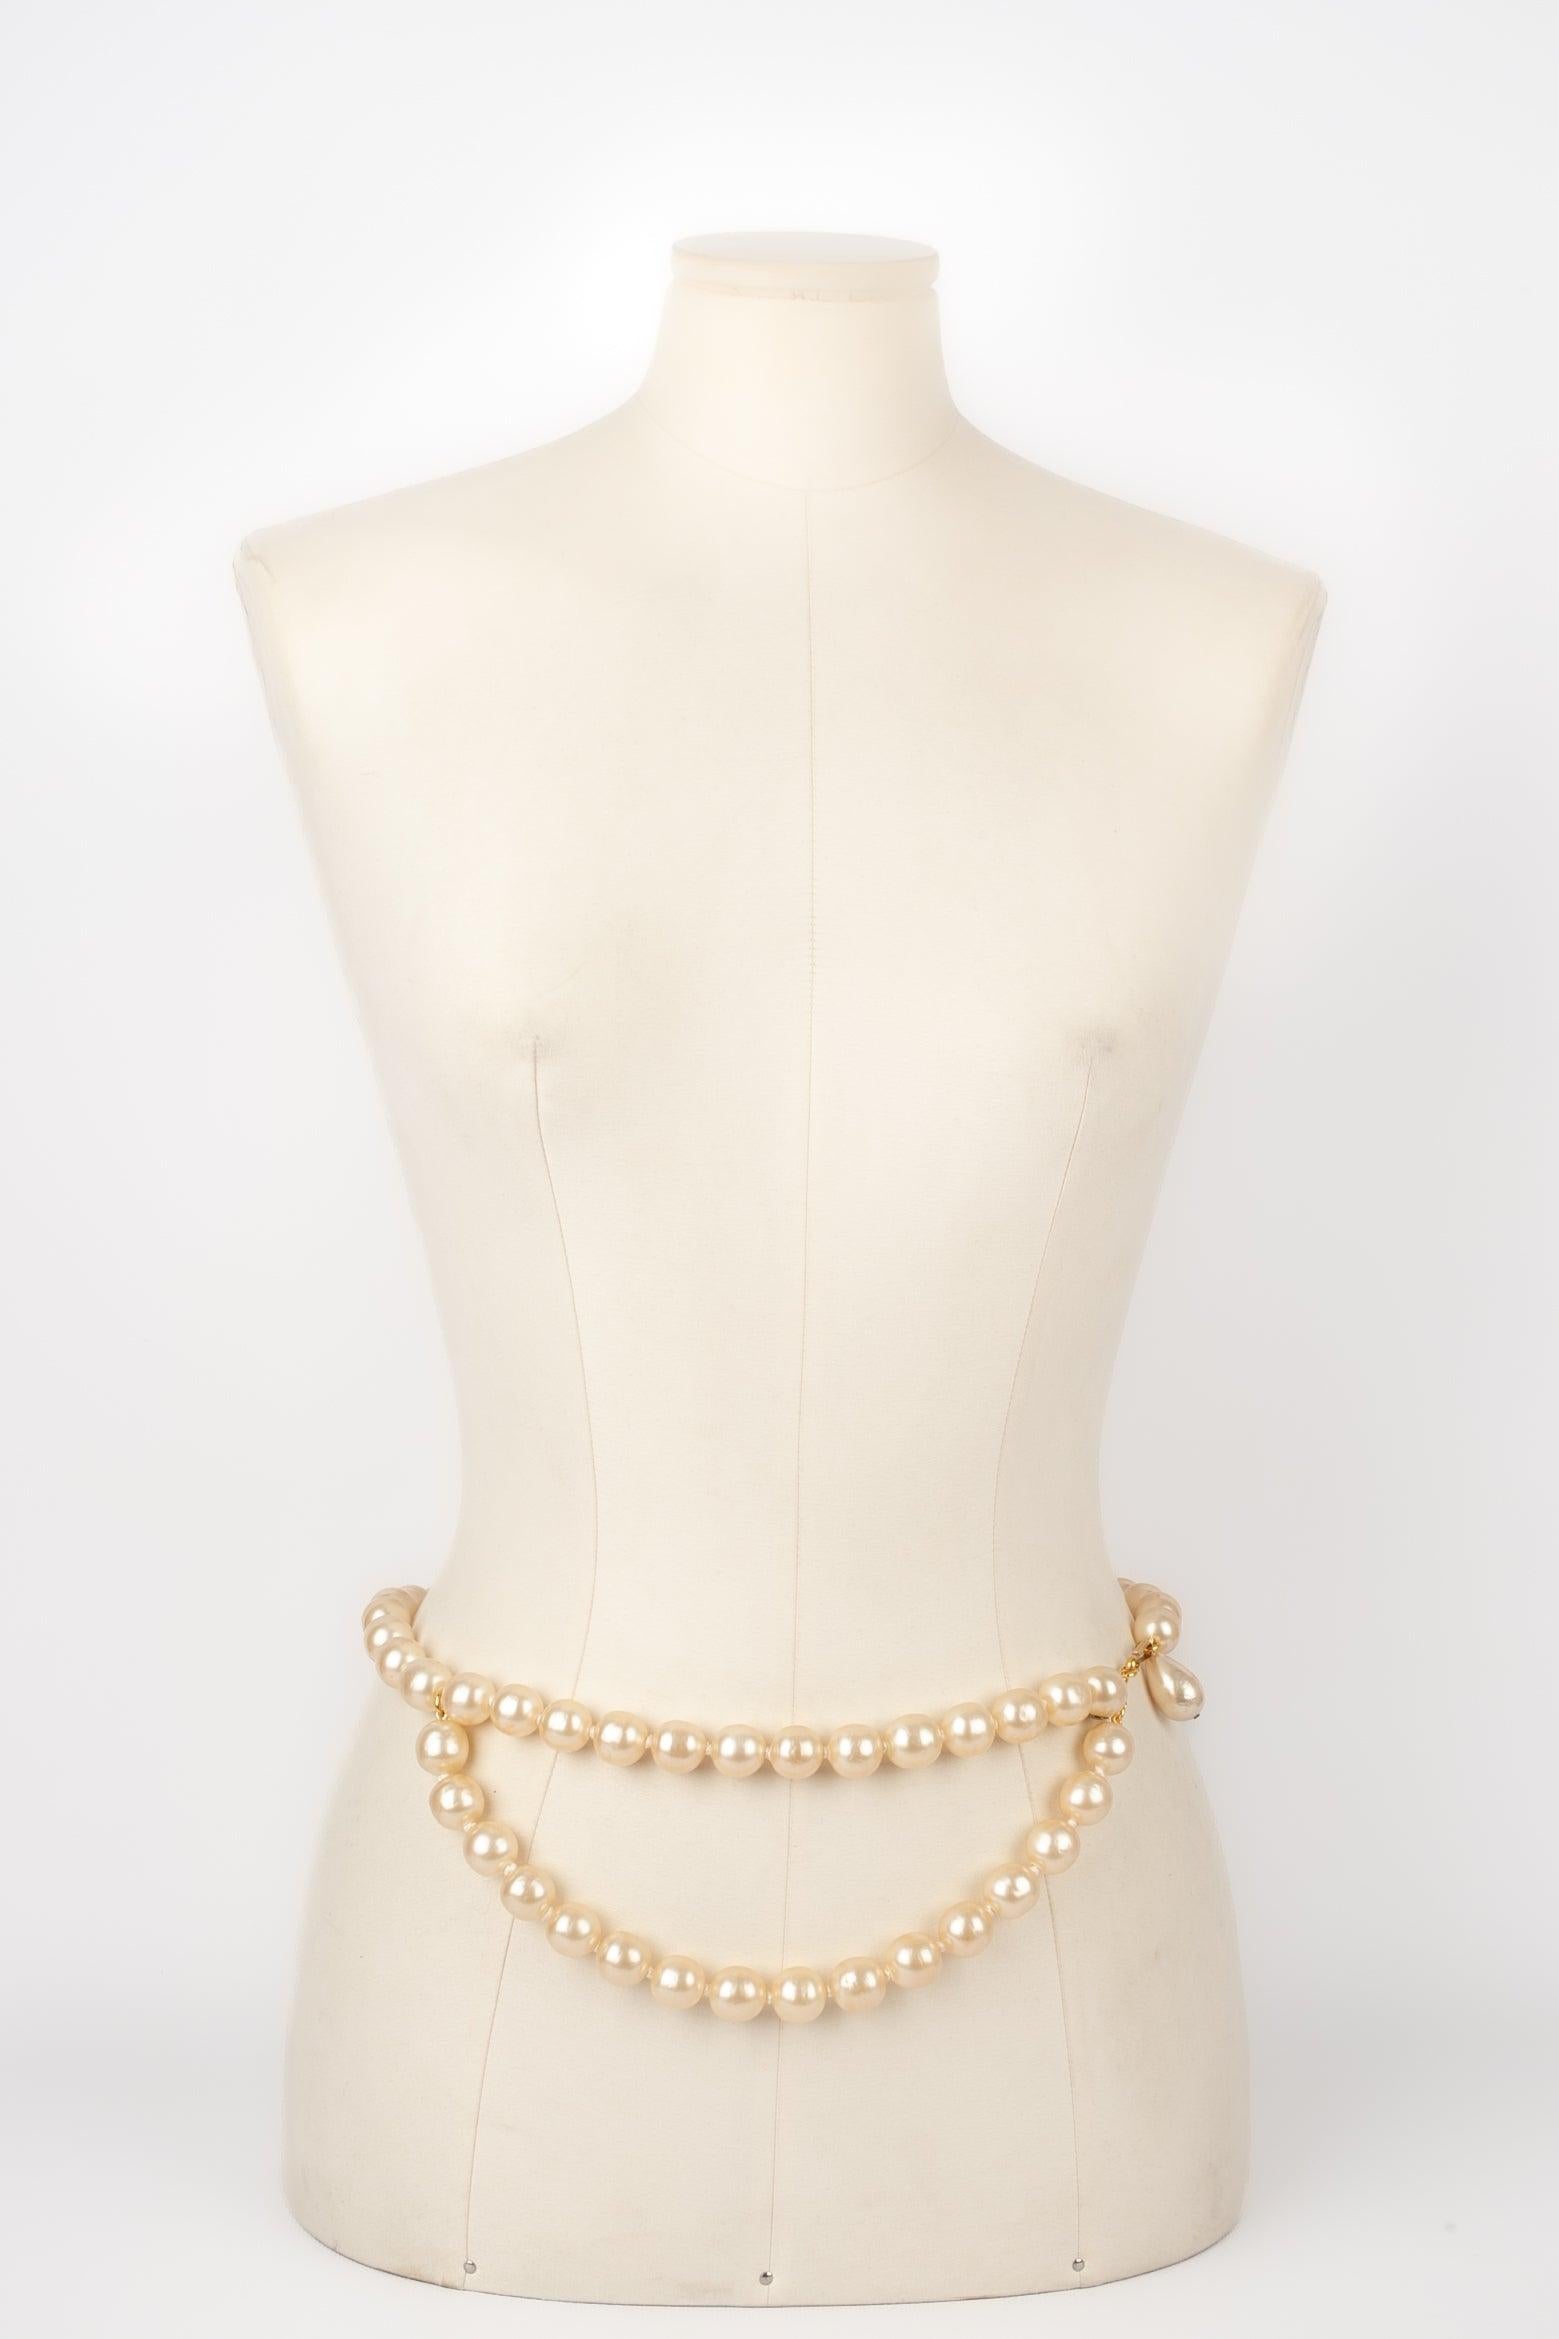 Chanel - (Made in France) Pearl belt assembled with knots. 1994 Fall-Winter Collection. To be mentioned, a pearl is flaked.
 
 Additional information: 
 Condition: Good condition
 Dimensions: Length: 82 cm
 Period: 20th Century
 
 Seller Reference: